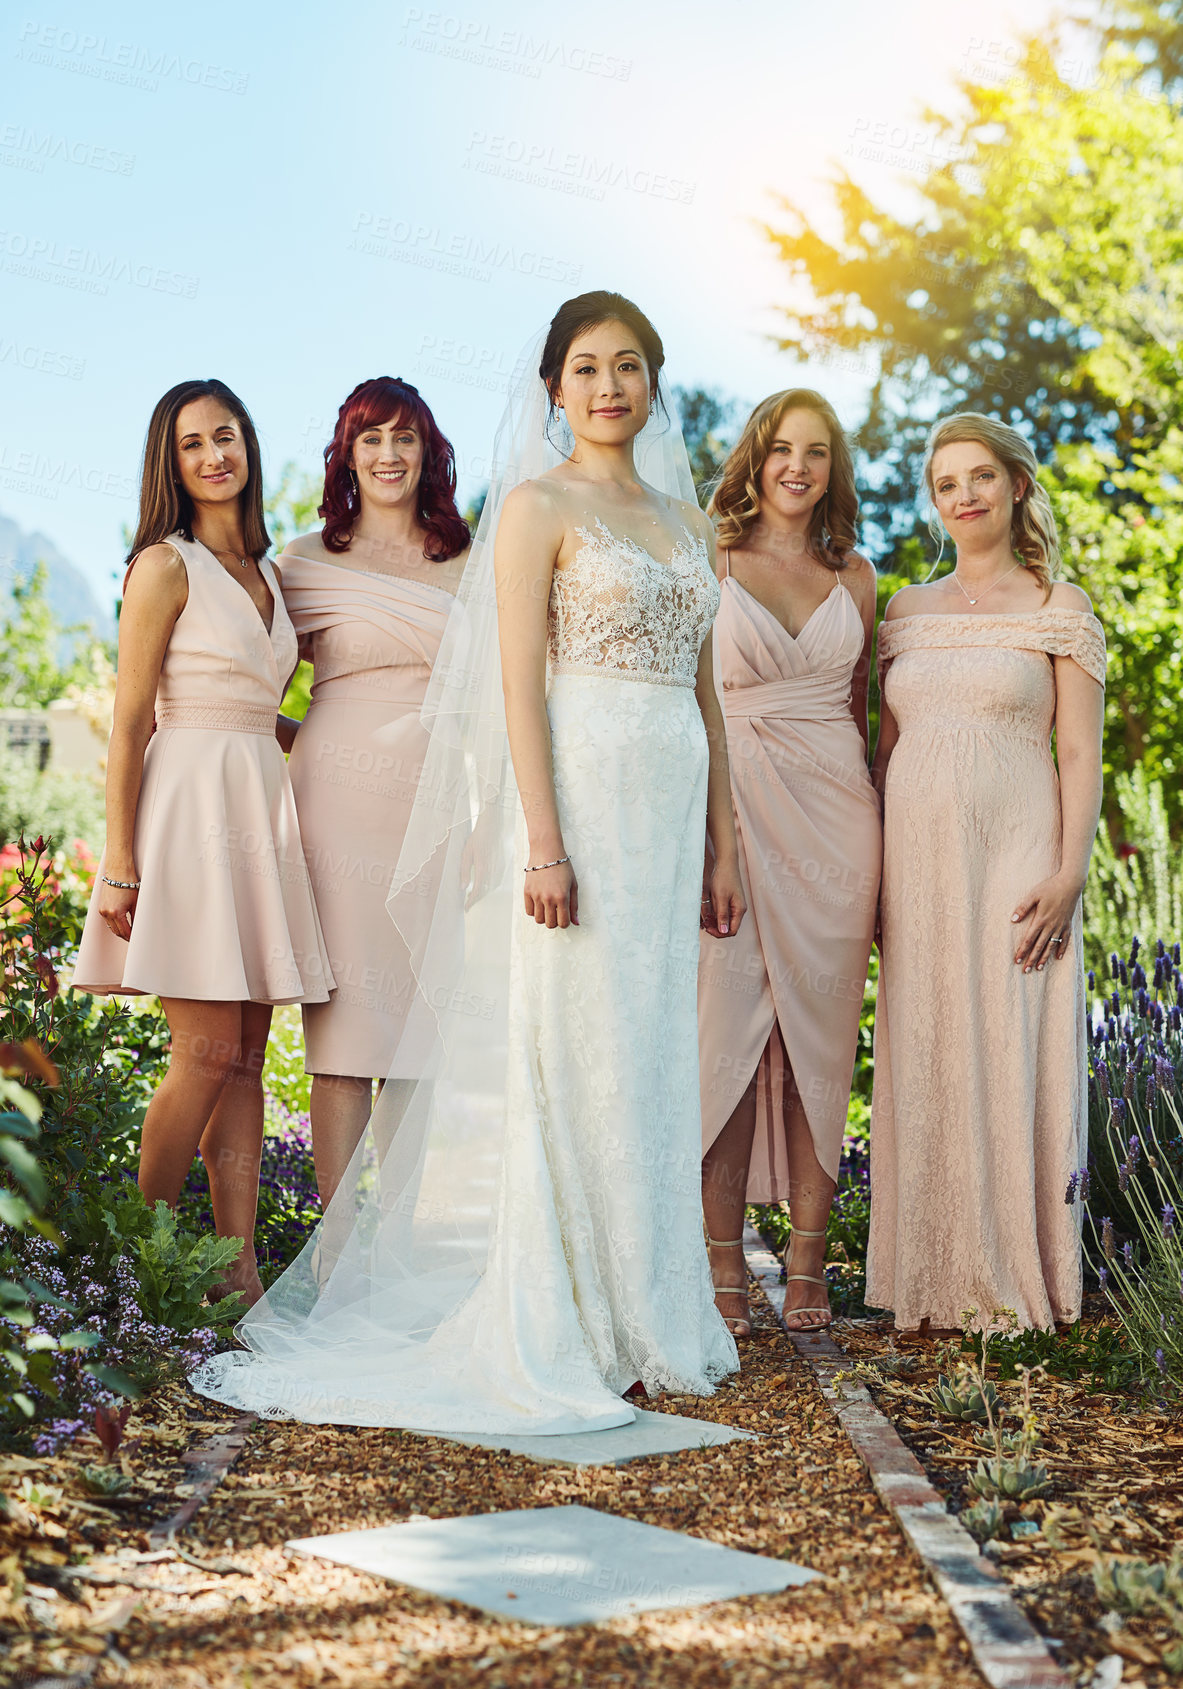 Buy stock photo Portrait of a cheerful young bride and her bride's maids standing together outside during the day